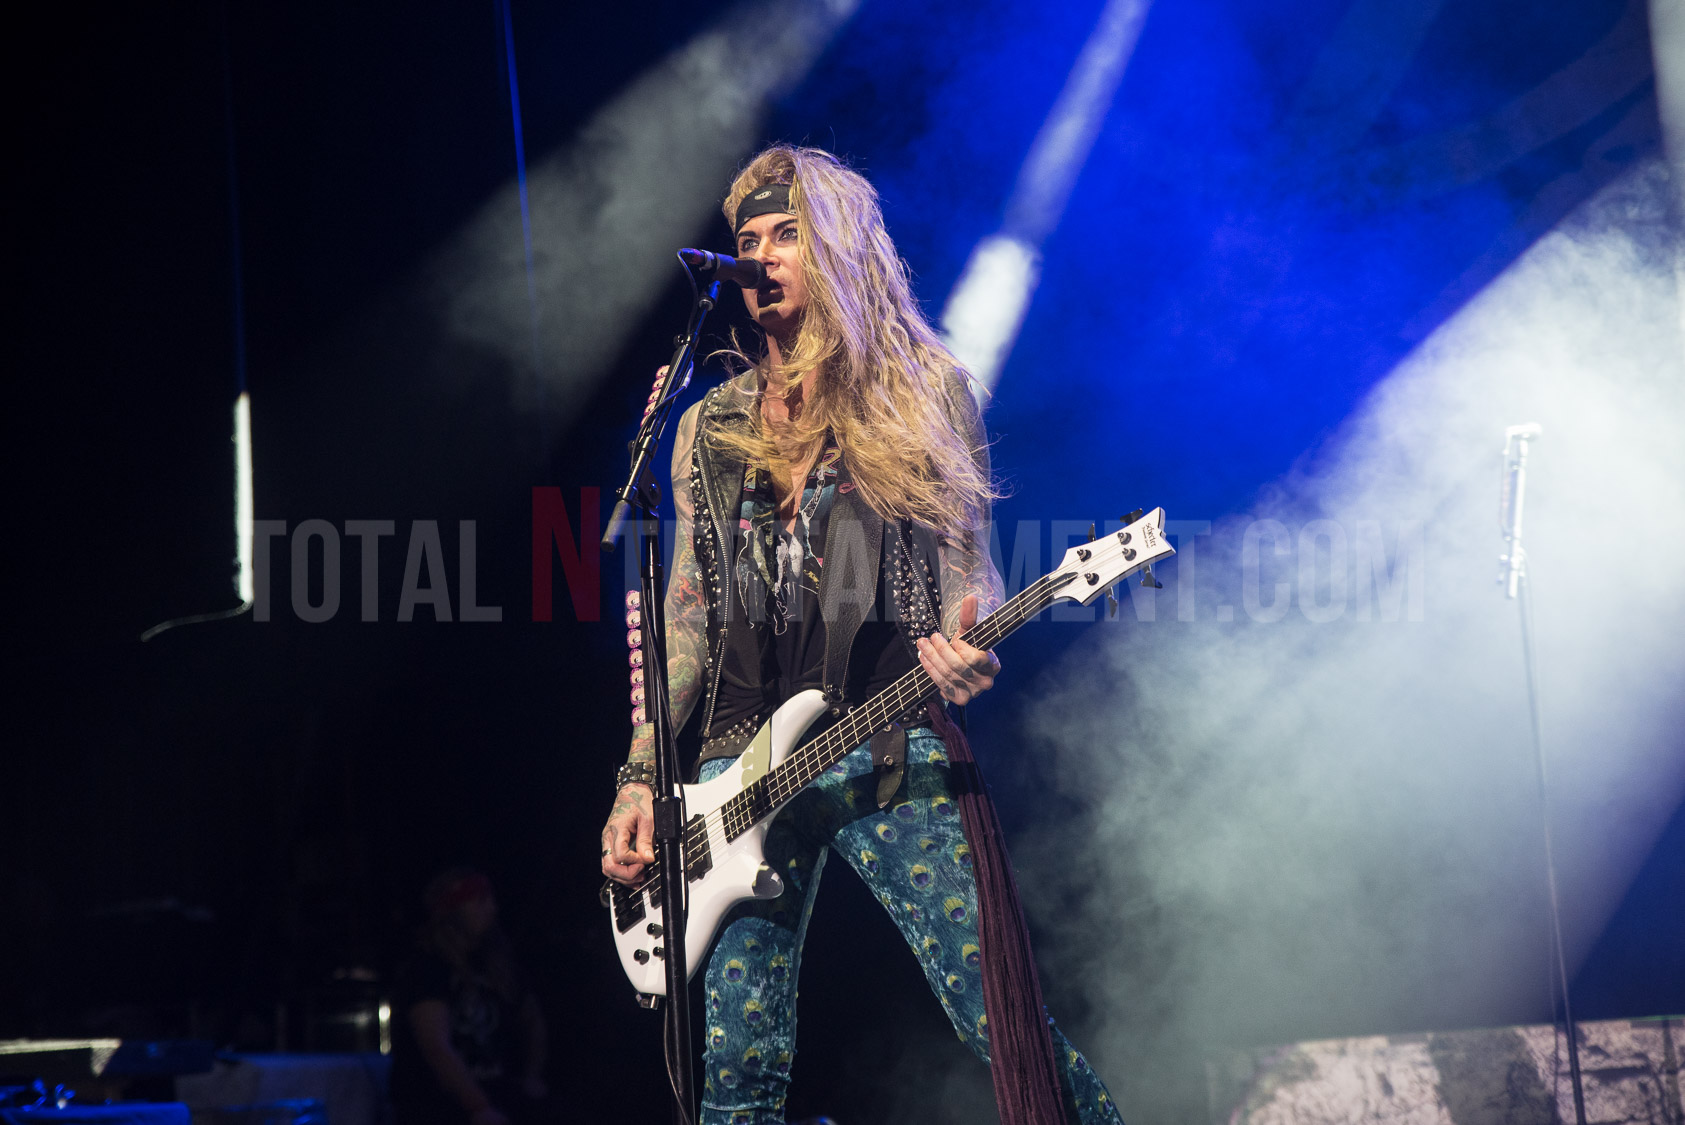 Steel Panther, Manchester, totalntertainment, music, live event, american